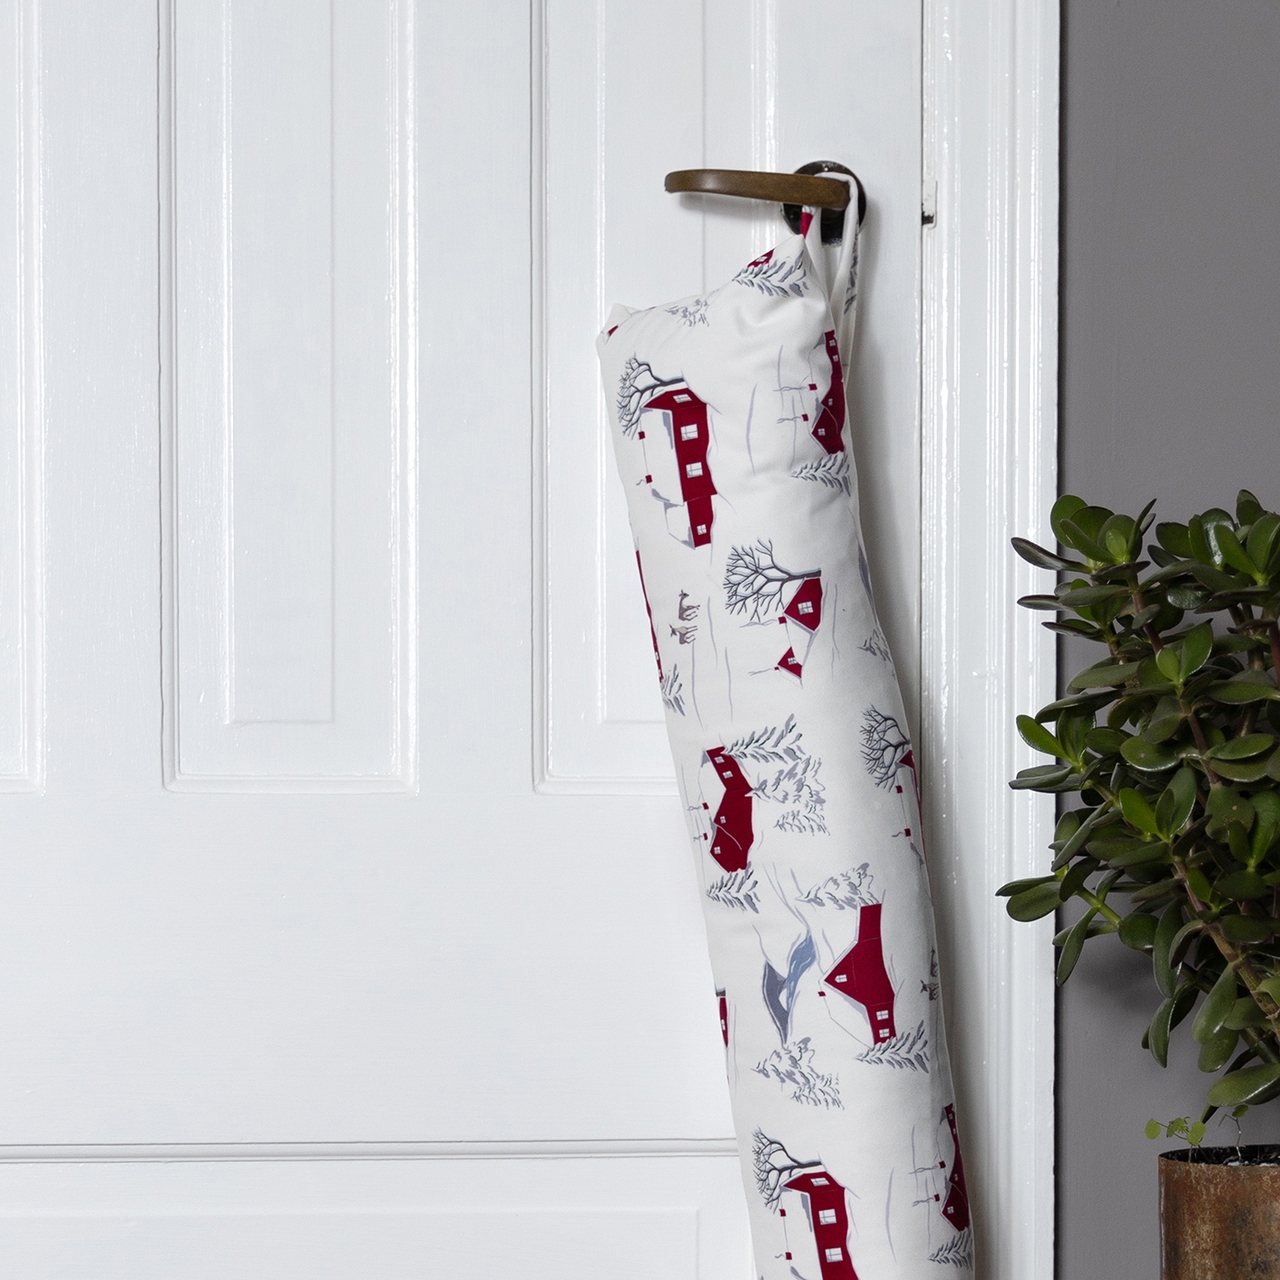 Celina Digby Luxury Velvet Christmas Draught Excluder – Winter Village (Available in 2 Sizes) Extra Large (110cm length)